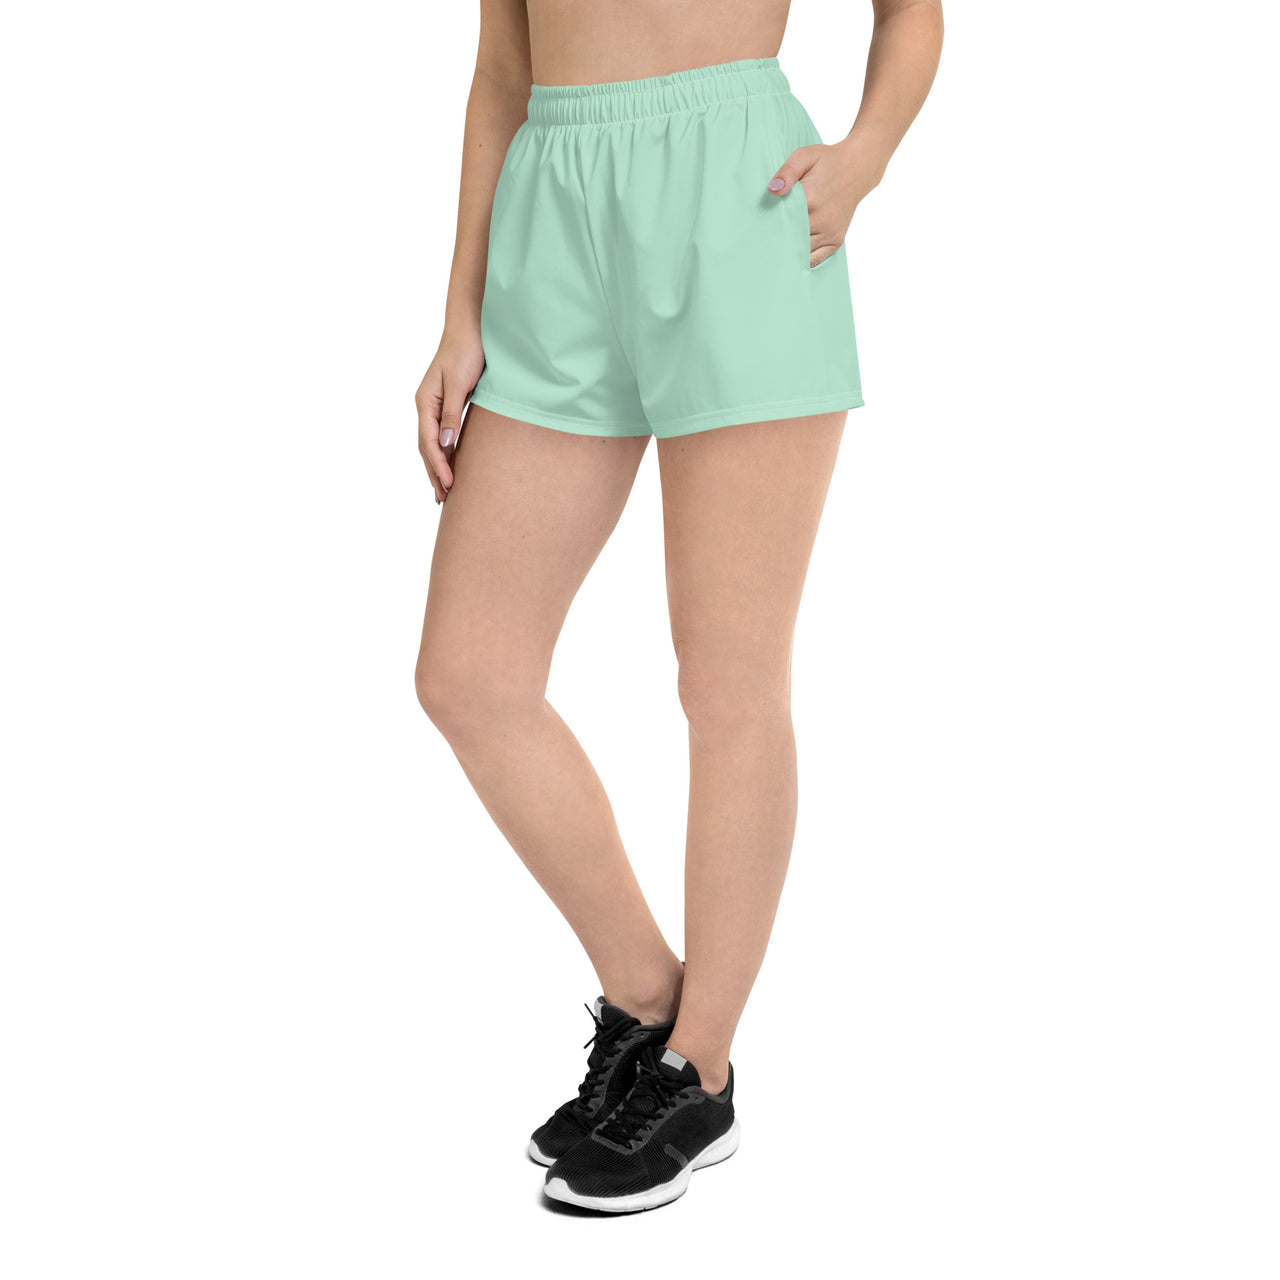 Women’s Recycled Solid Athletic Shorts - Pistachio SHAVA CO